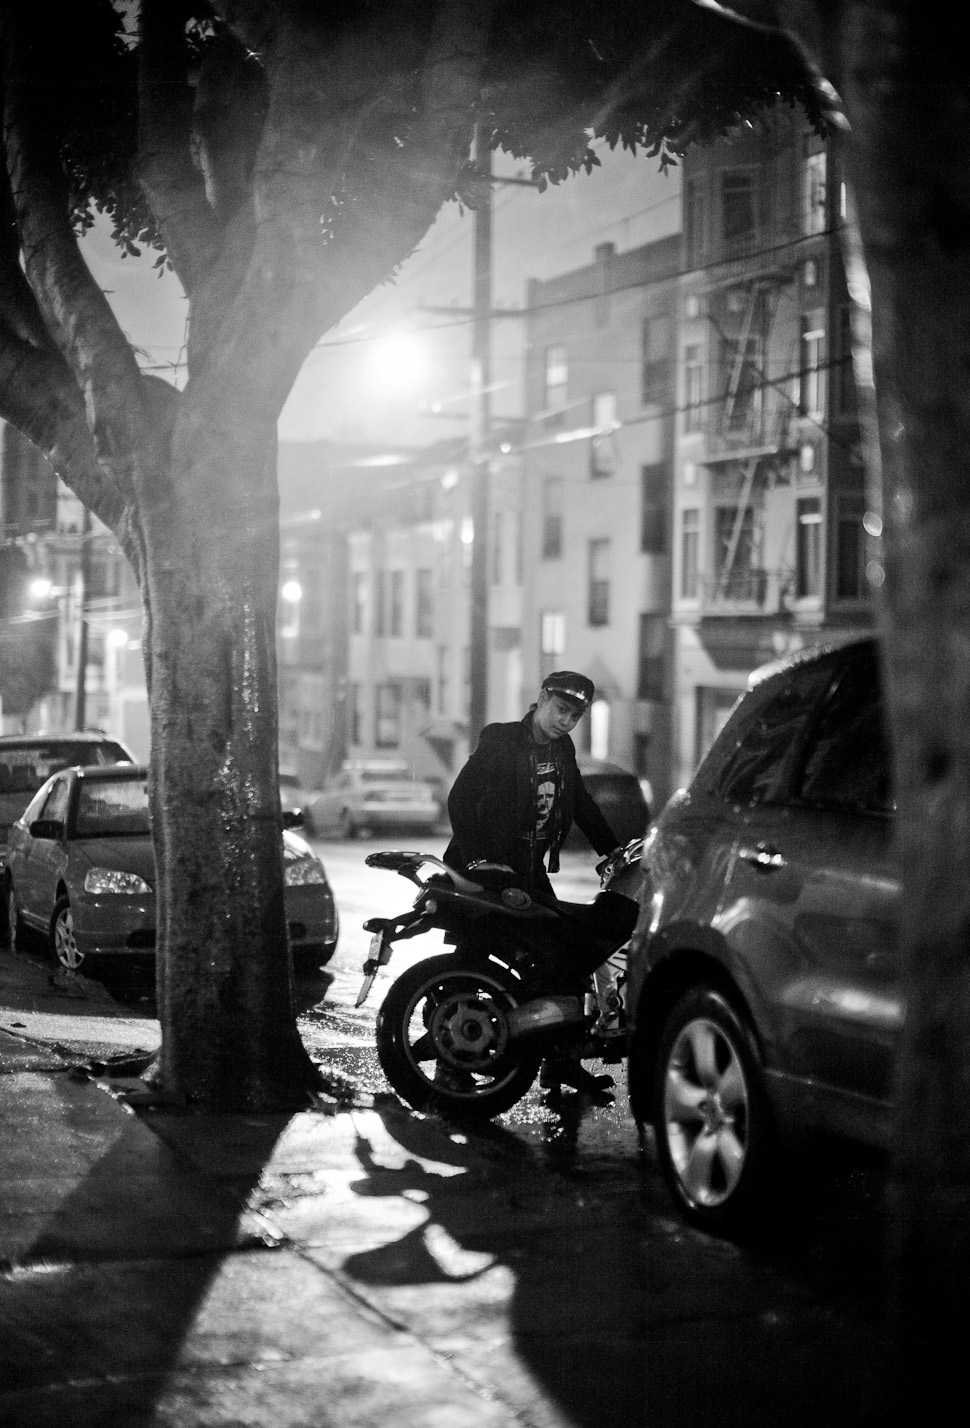 San Francisco, February 2014. Leica M 240 with Leica 50mm Noctilux-M ASPH f/0.95